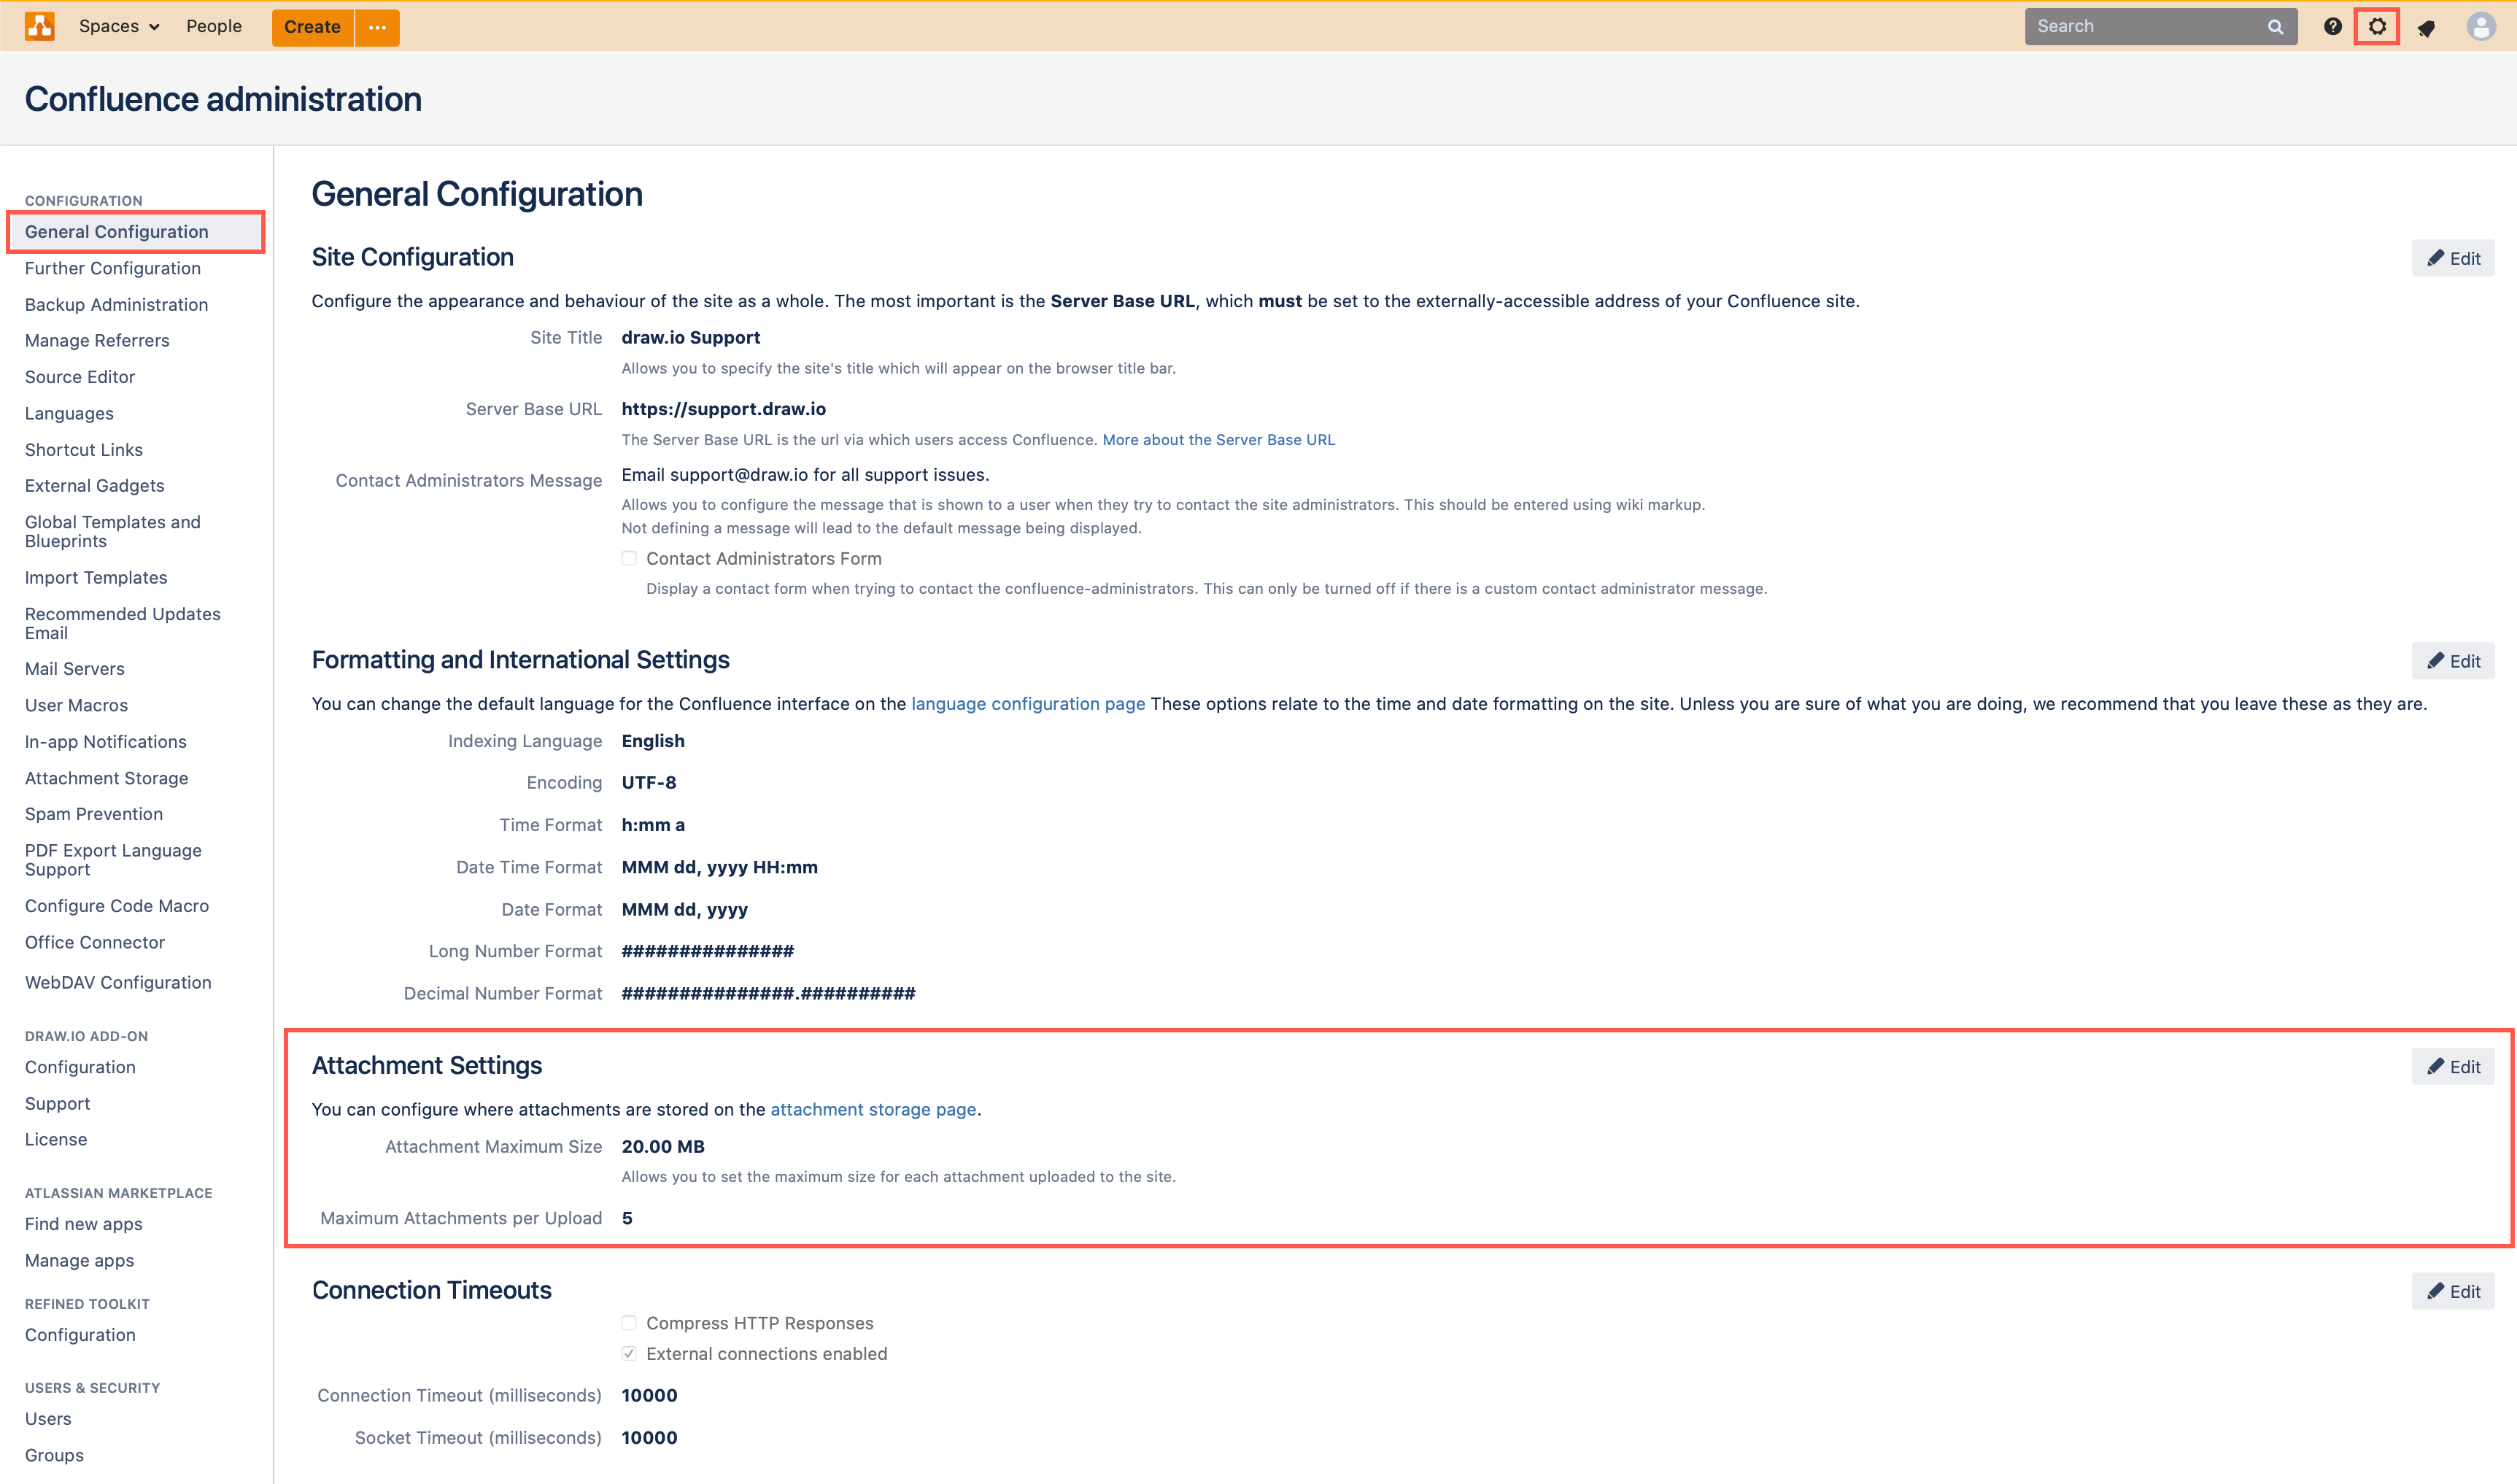 Confluence Server attachment settings in the General Configuration section of your Server settings